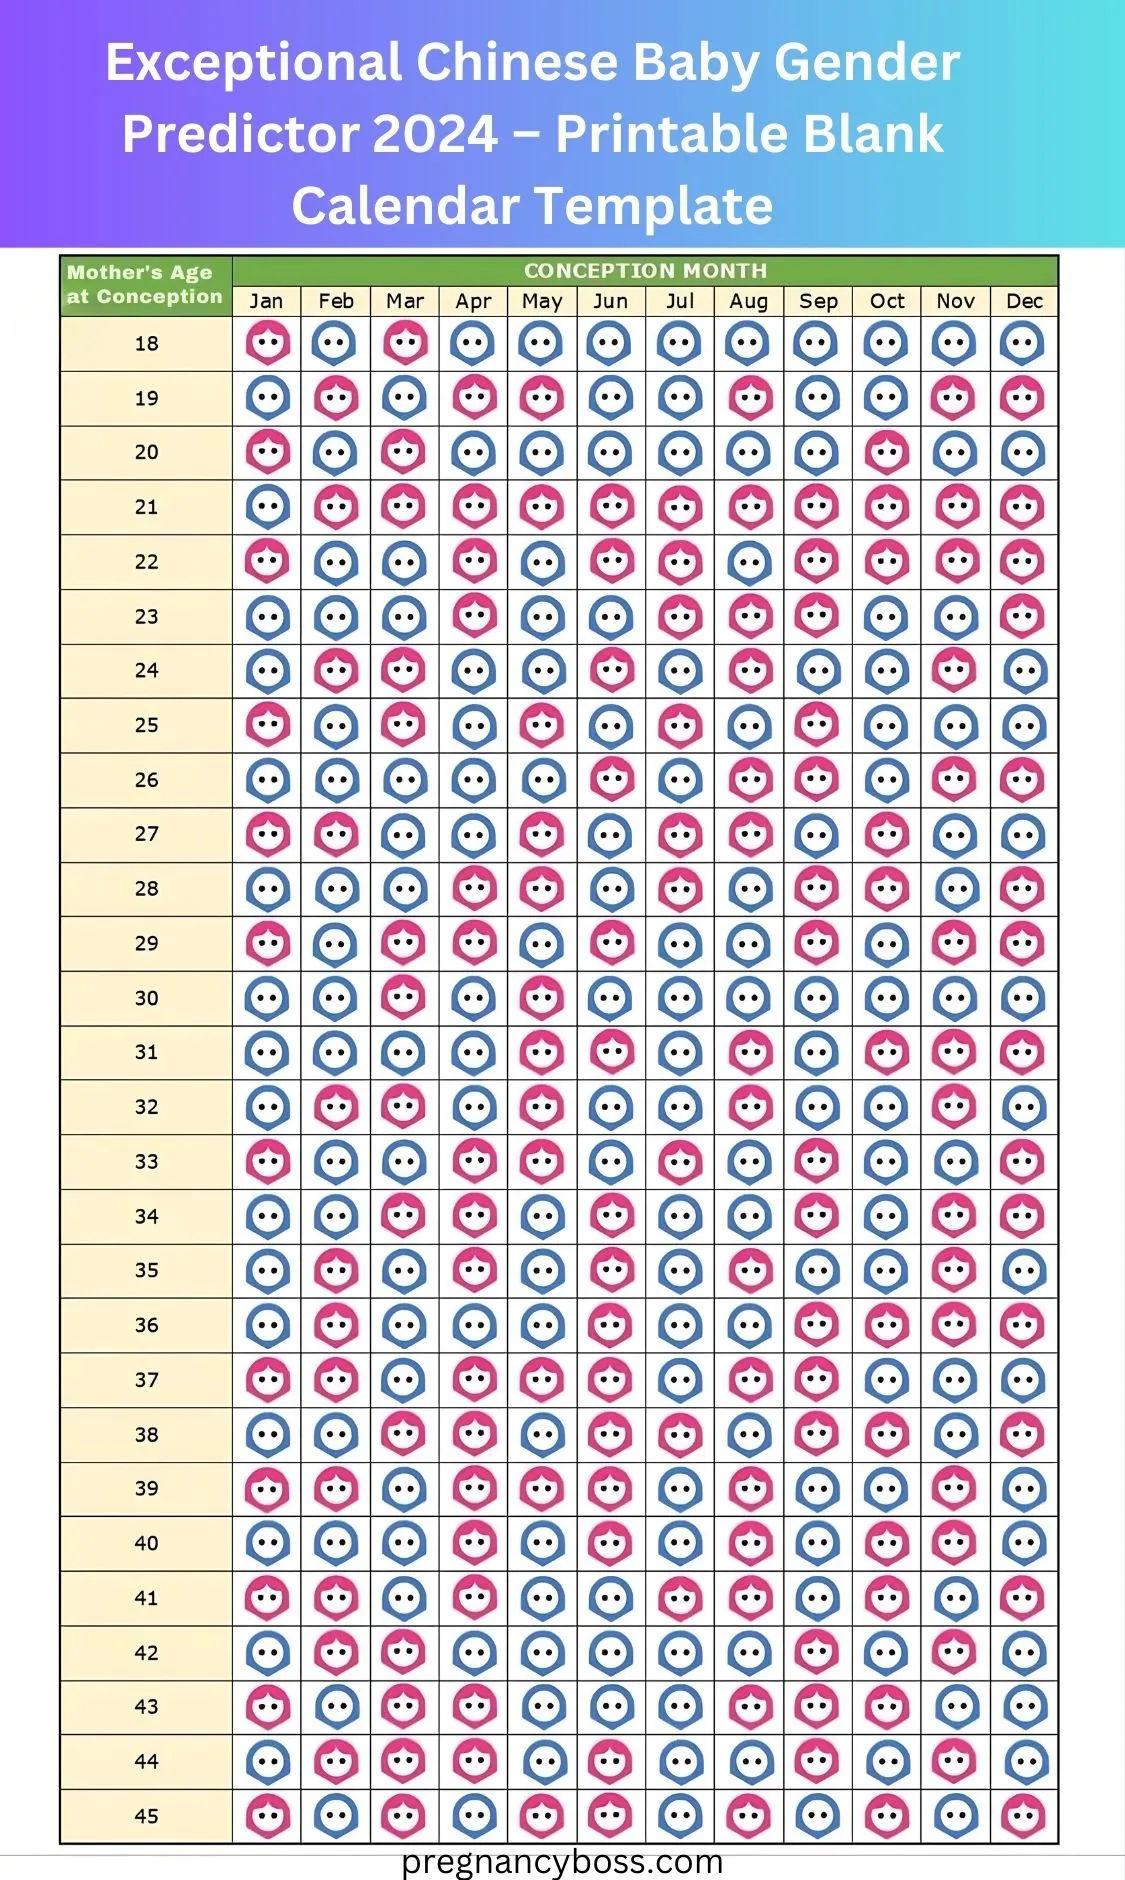 Exceptional Chinese Baby Gender Predictor 2024 – Printable Blank Calendar Template